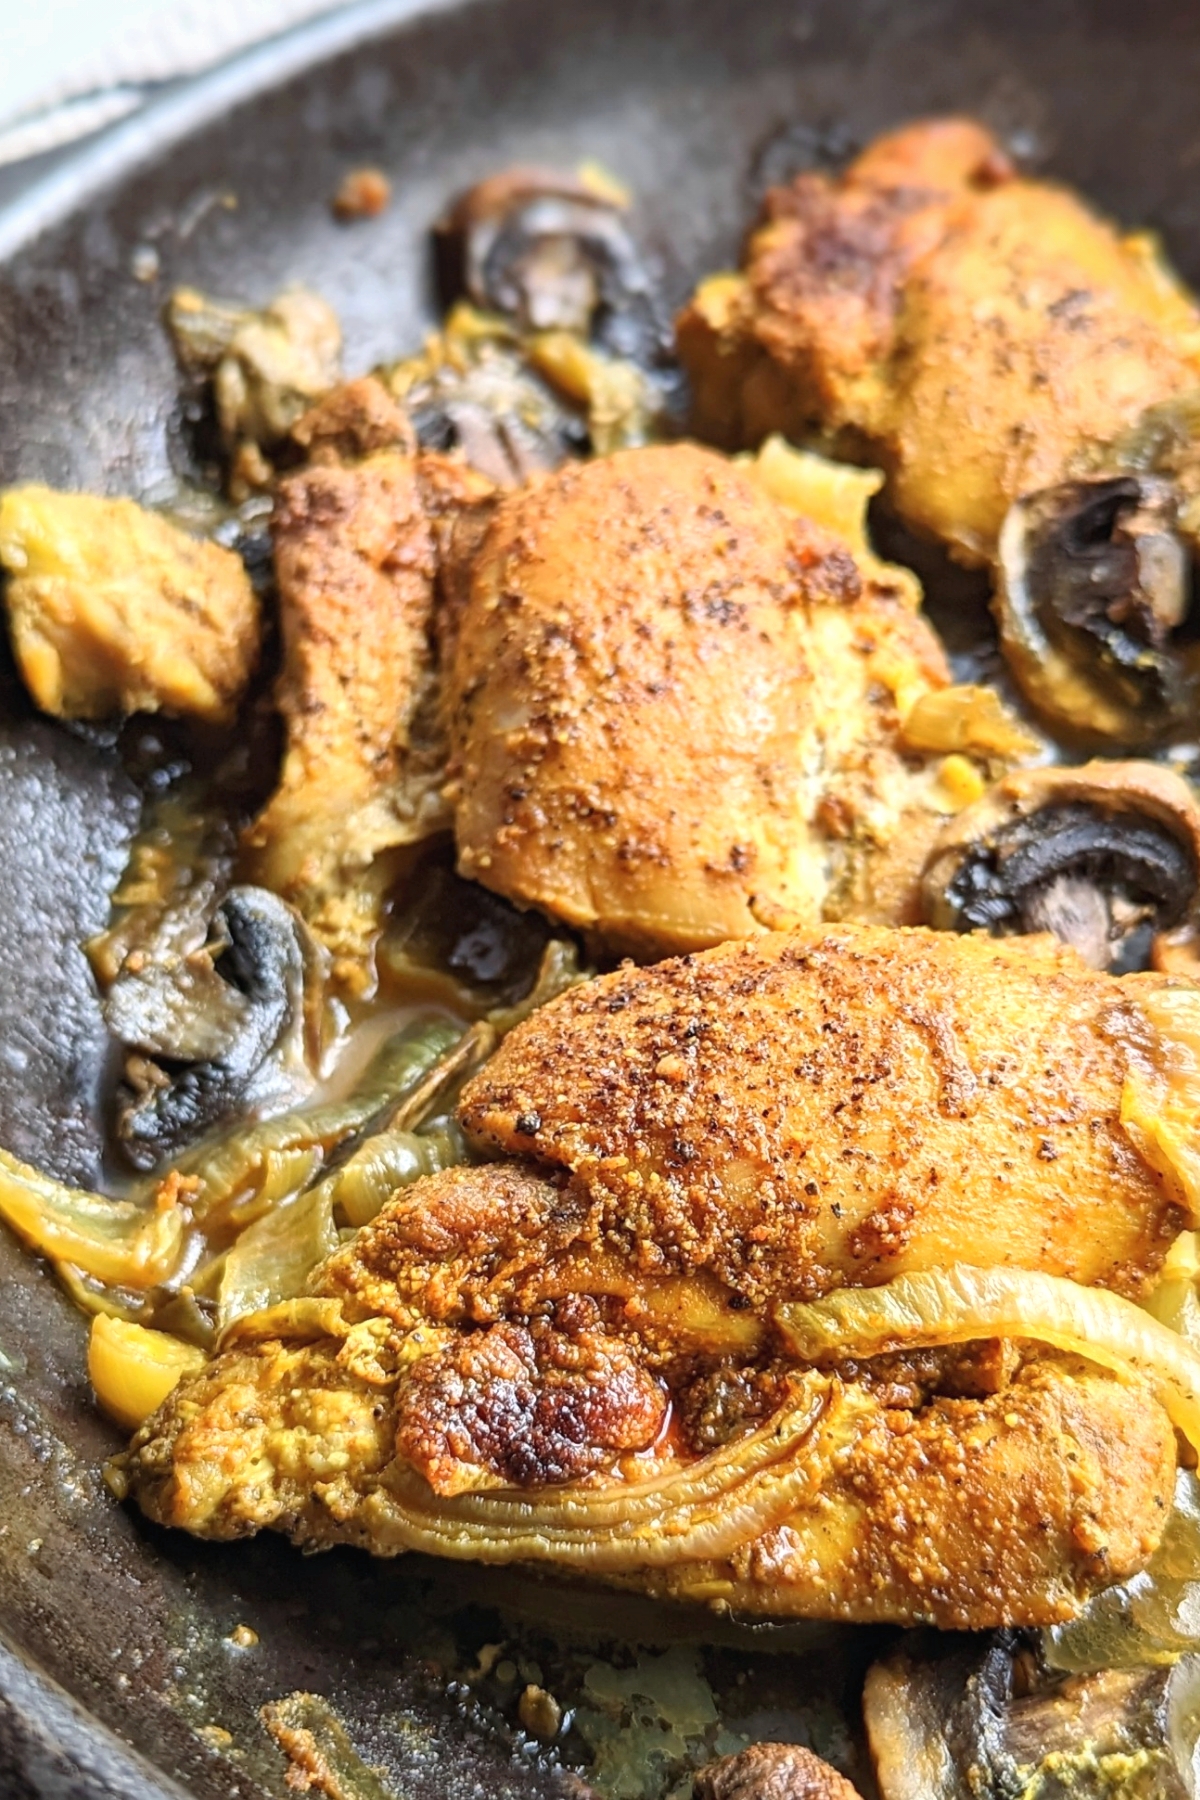 skillet chicken thighs in the oven chicken thighs with turmeric and black pepper cast iron skillet chicken in the oven recipe with onions and peppers